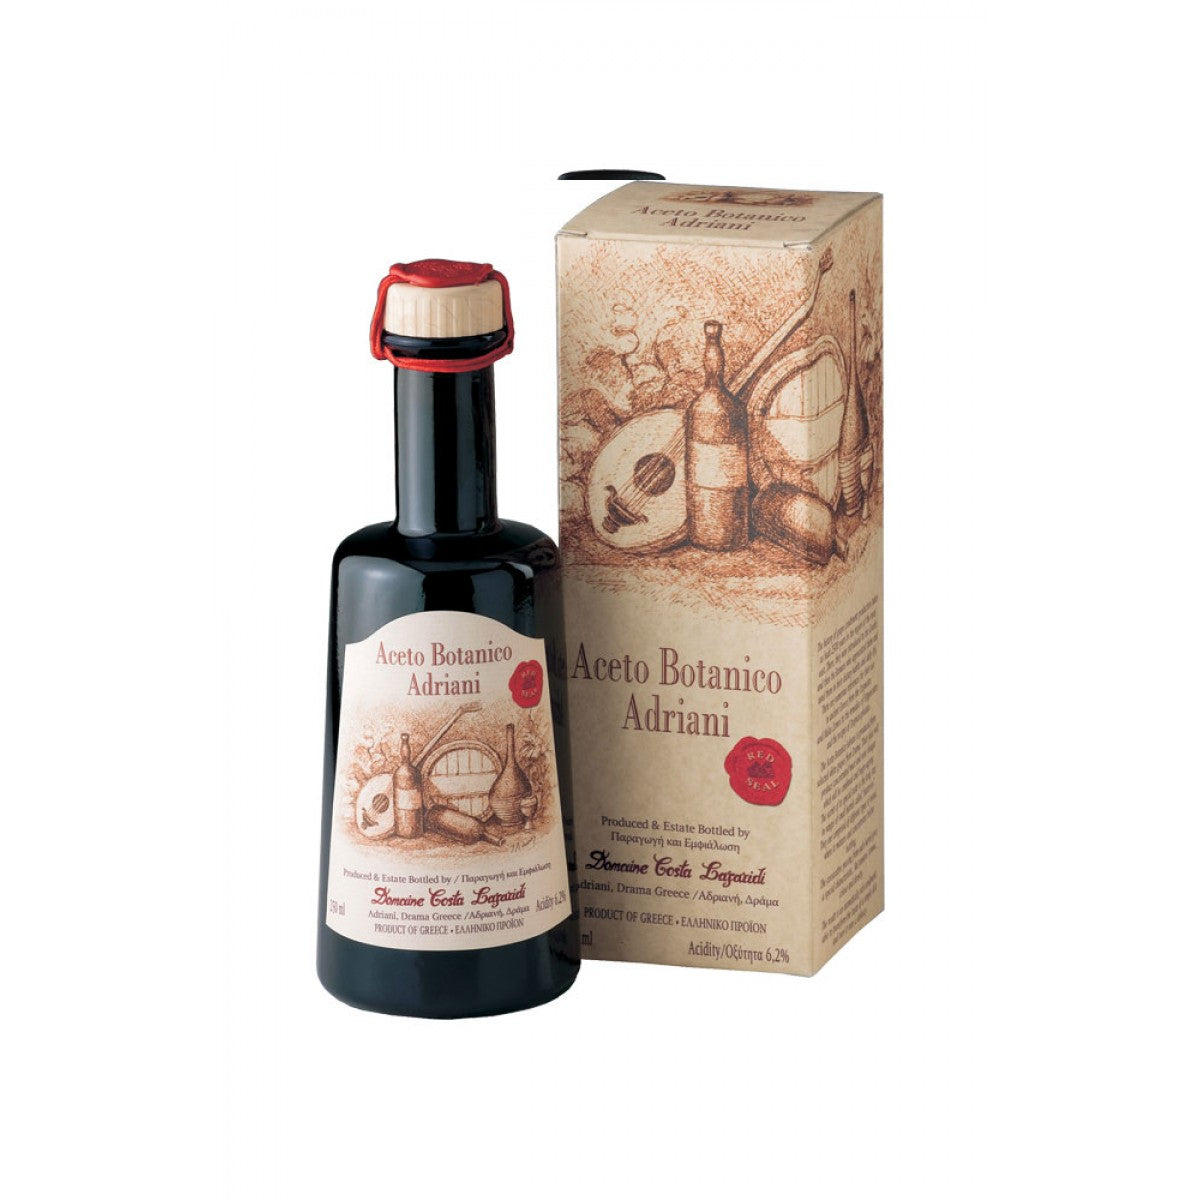 Organic Botanico Balsamic Vinegar - Aged 6 Years in Oak Barrels for Complex Aromas and Flavors - High in Antioxidants and Polyphenols for Improved Health and Well-Being,  8.45 fl oz by Alpha Omega Imports